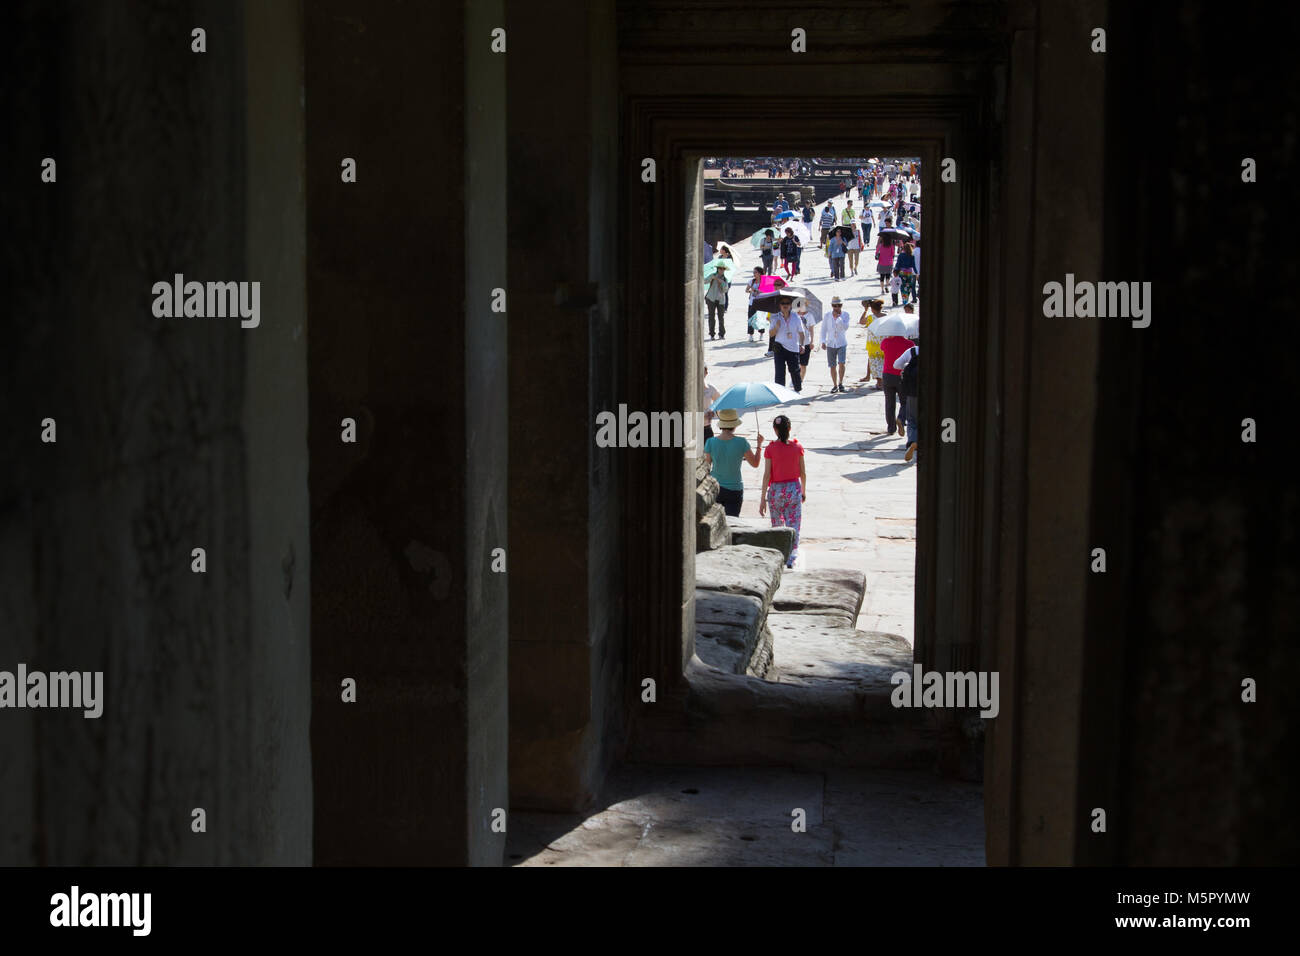 Crowds of tourists visiting Angkor Wat in Cambodia, Southeast Asia, as seen through a doorway. Stock Photo